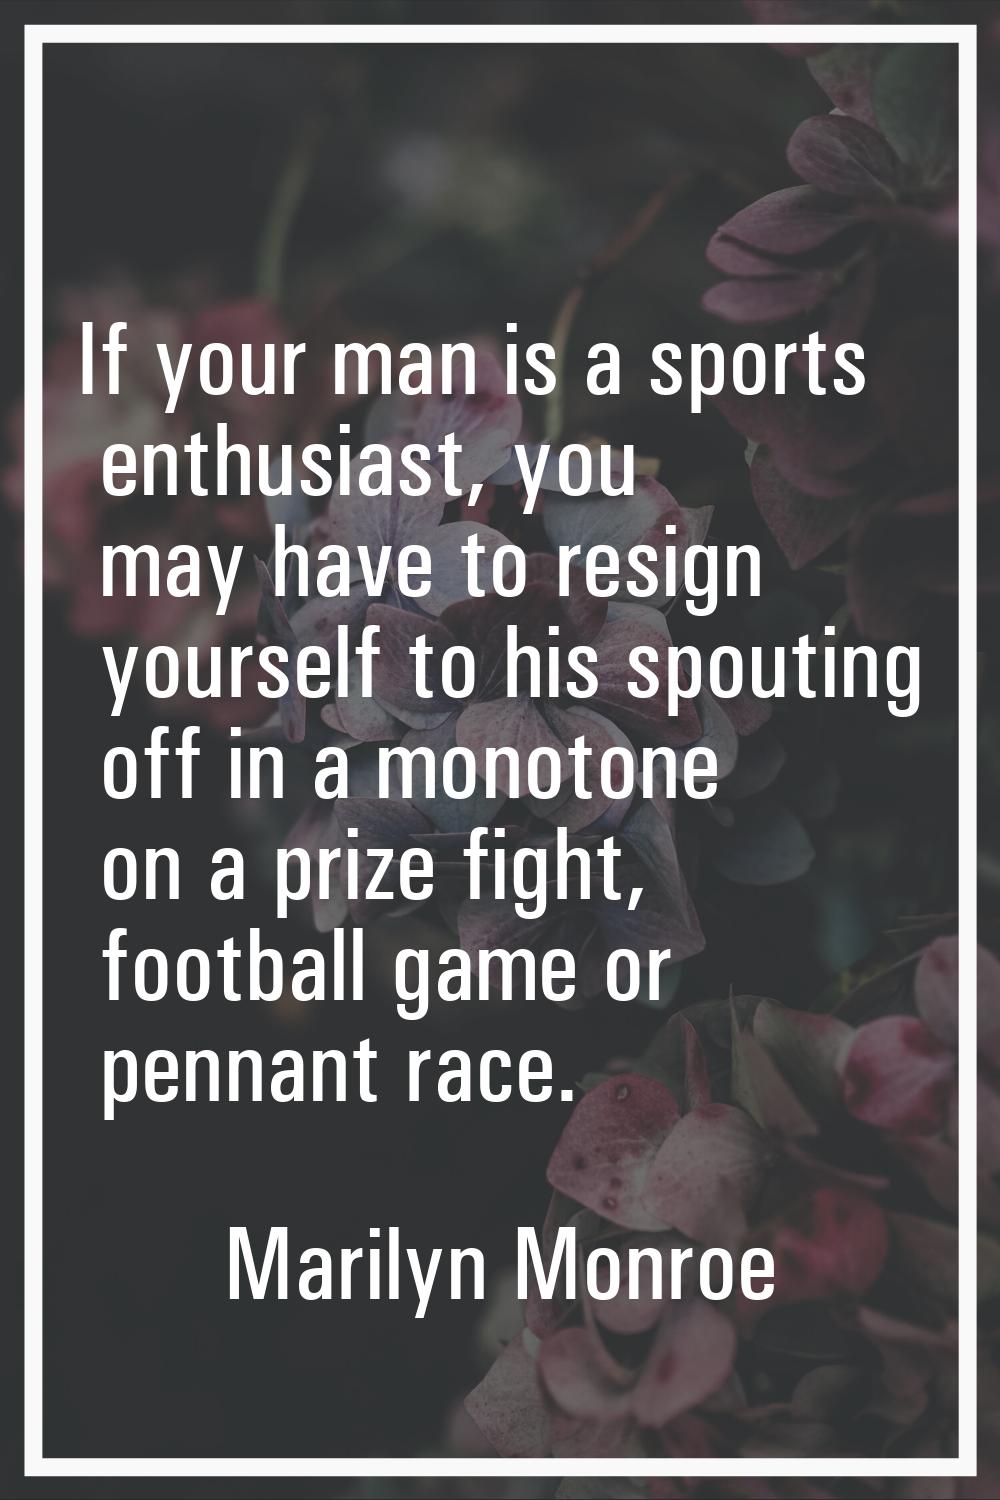 If your man is a sports enthusiast, you may have to resign yourself to his spouting off in a monoto